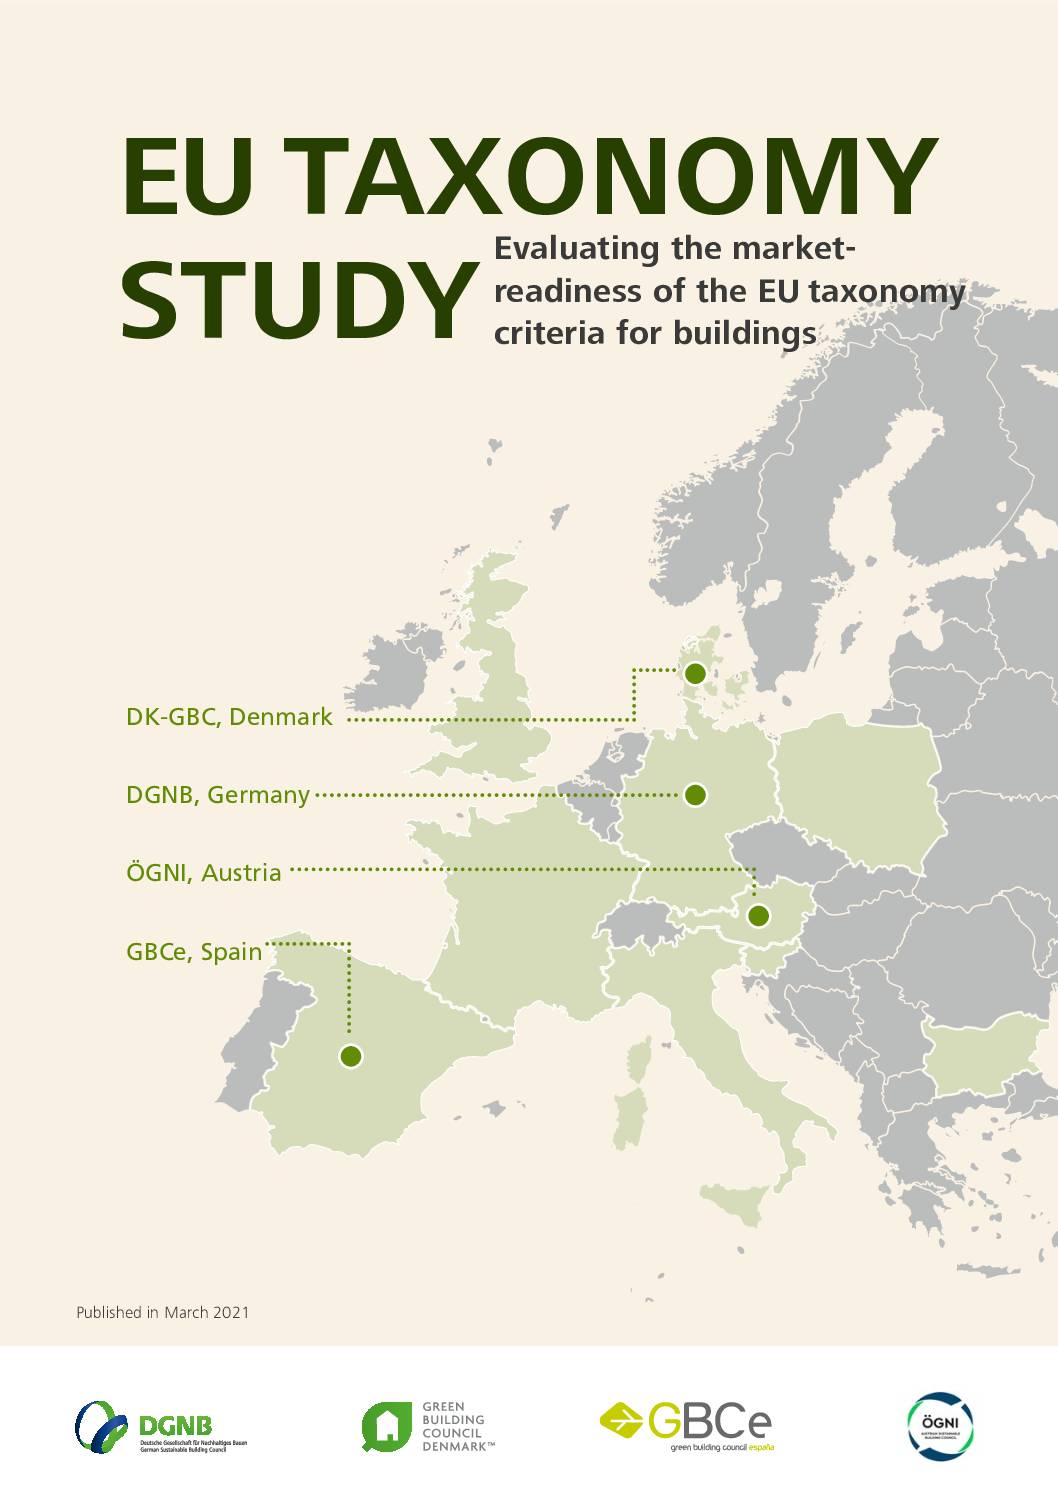 EU Taxonomy Study: Evaluating the Market-Readiness of the EU Taxonomy Criteria for Buildings